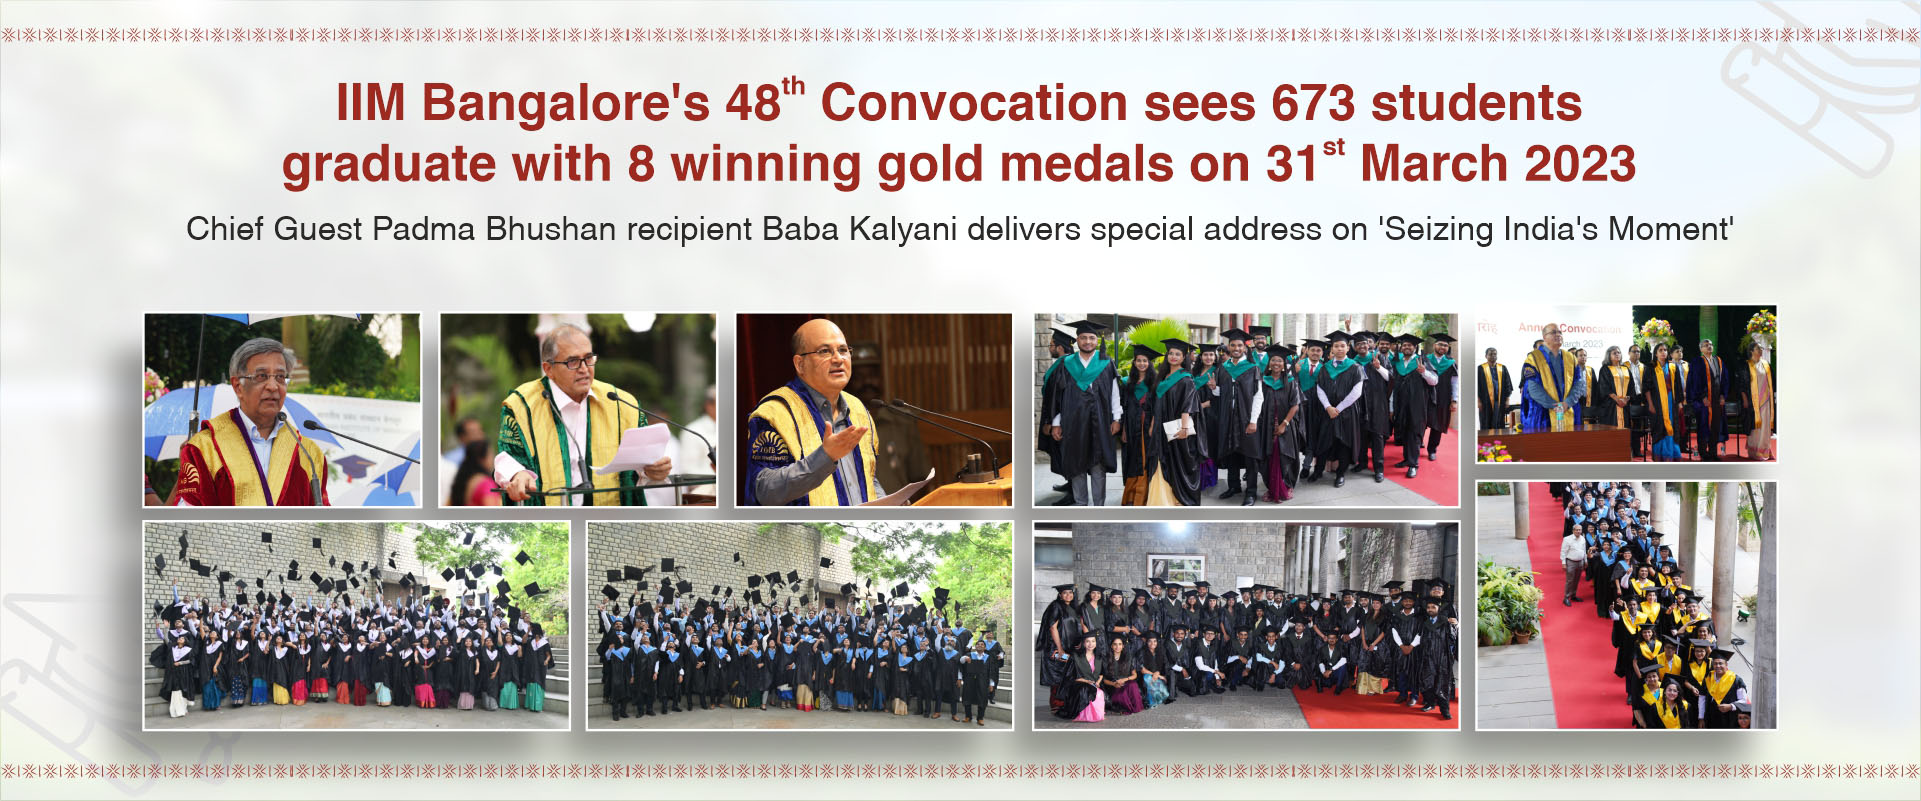 IIM Bangalore’s 48th Convocation sees 673 students graduate with 8 winning gold medals